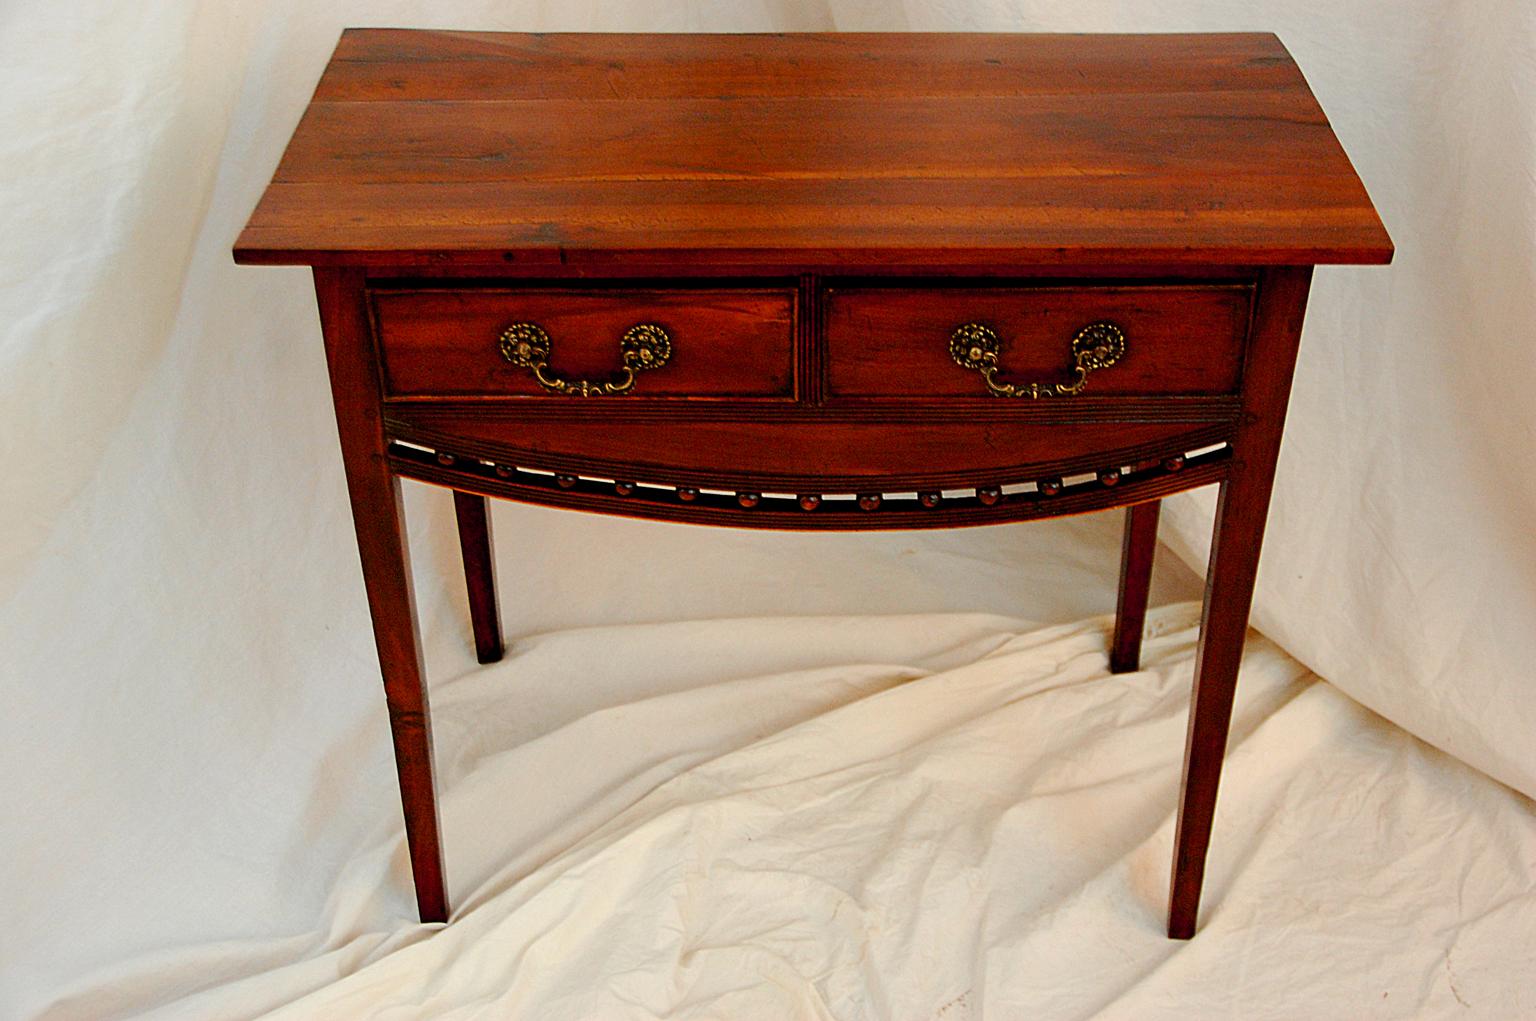 English Regency period fruitwood dressing table with two drawers, tapered legs and convex skirt. This table comes from the East Anglia area of England, one of the hall marks of these area is the convex reeded skirting with balls. This particular